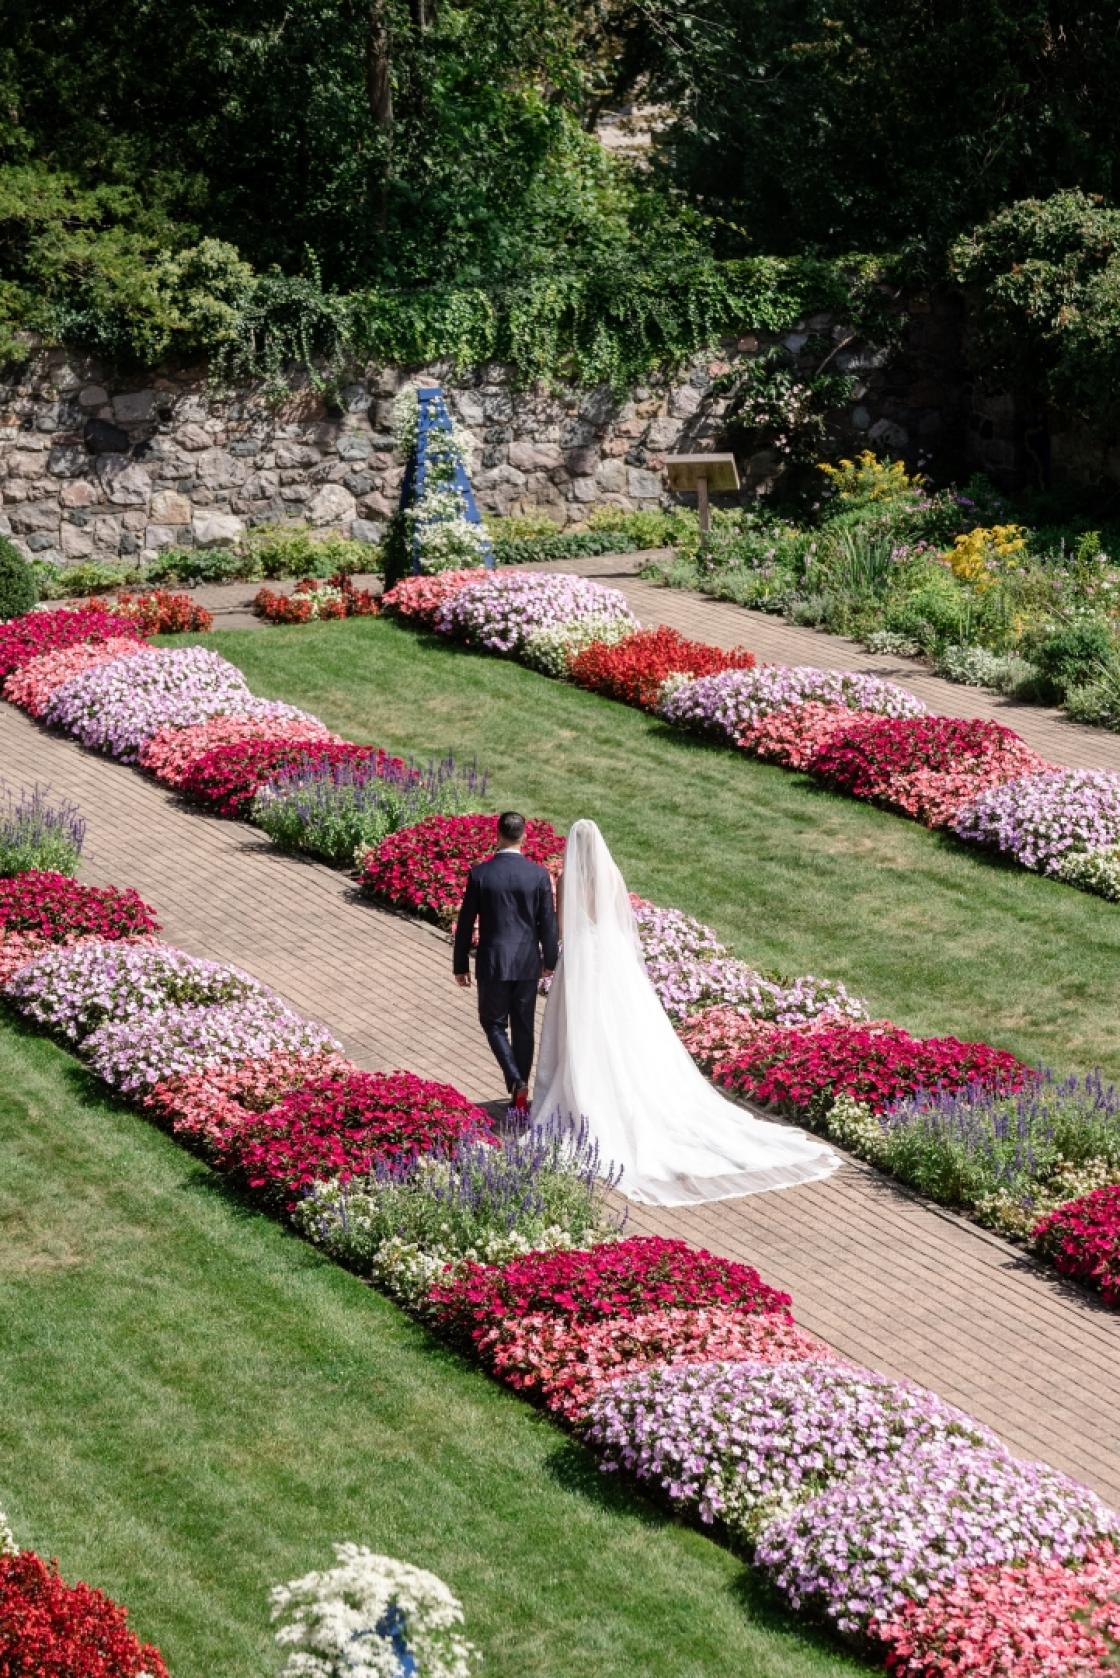 Photograph of a bride and groom in the Sunken Garden.